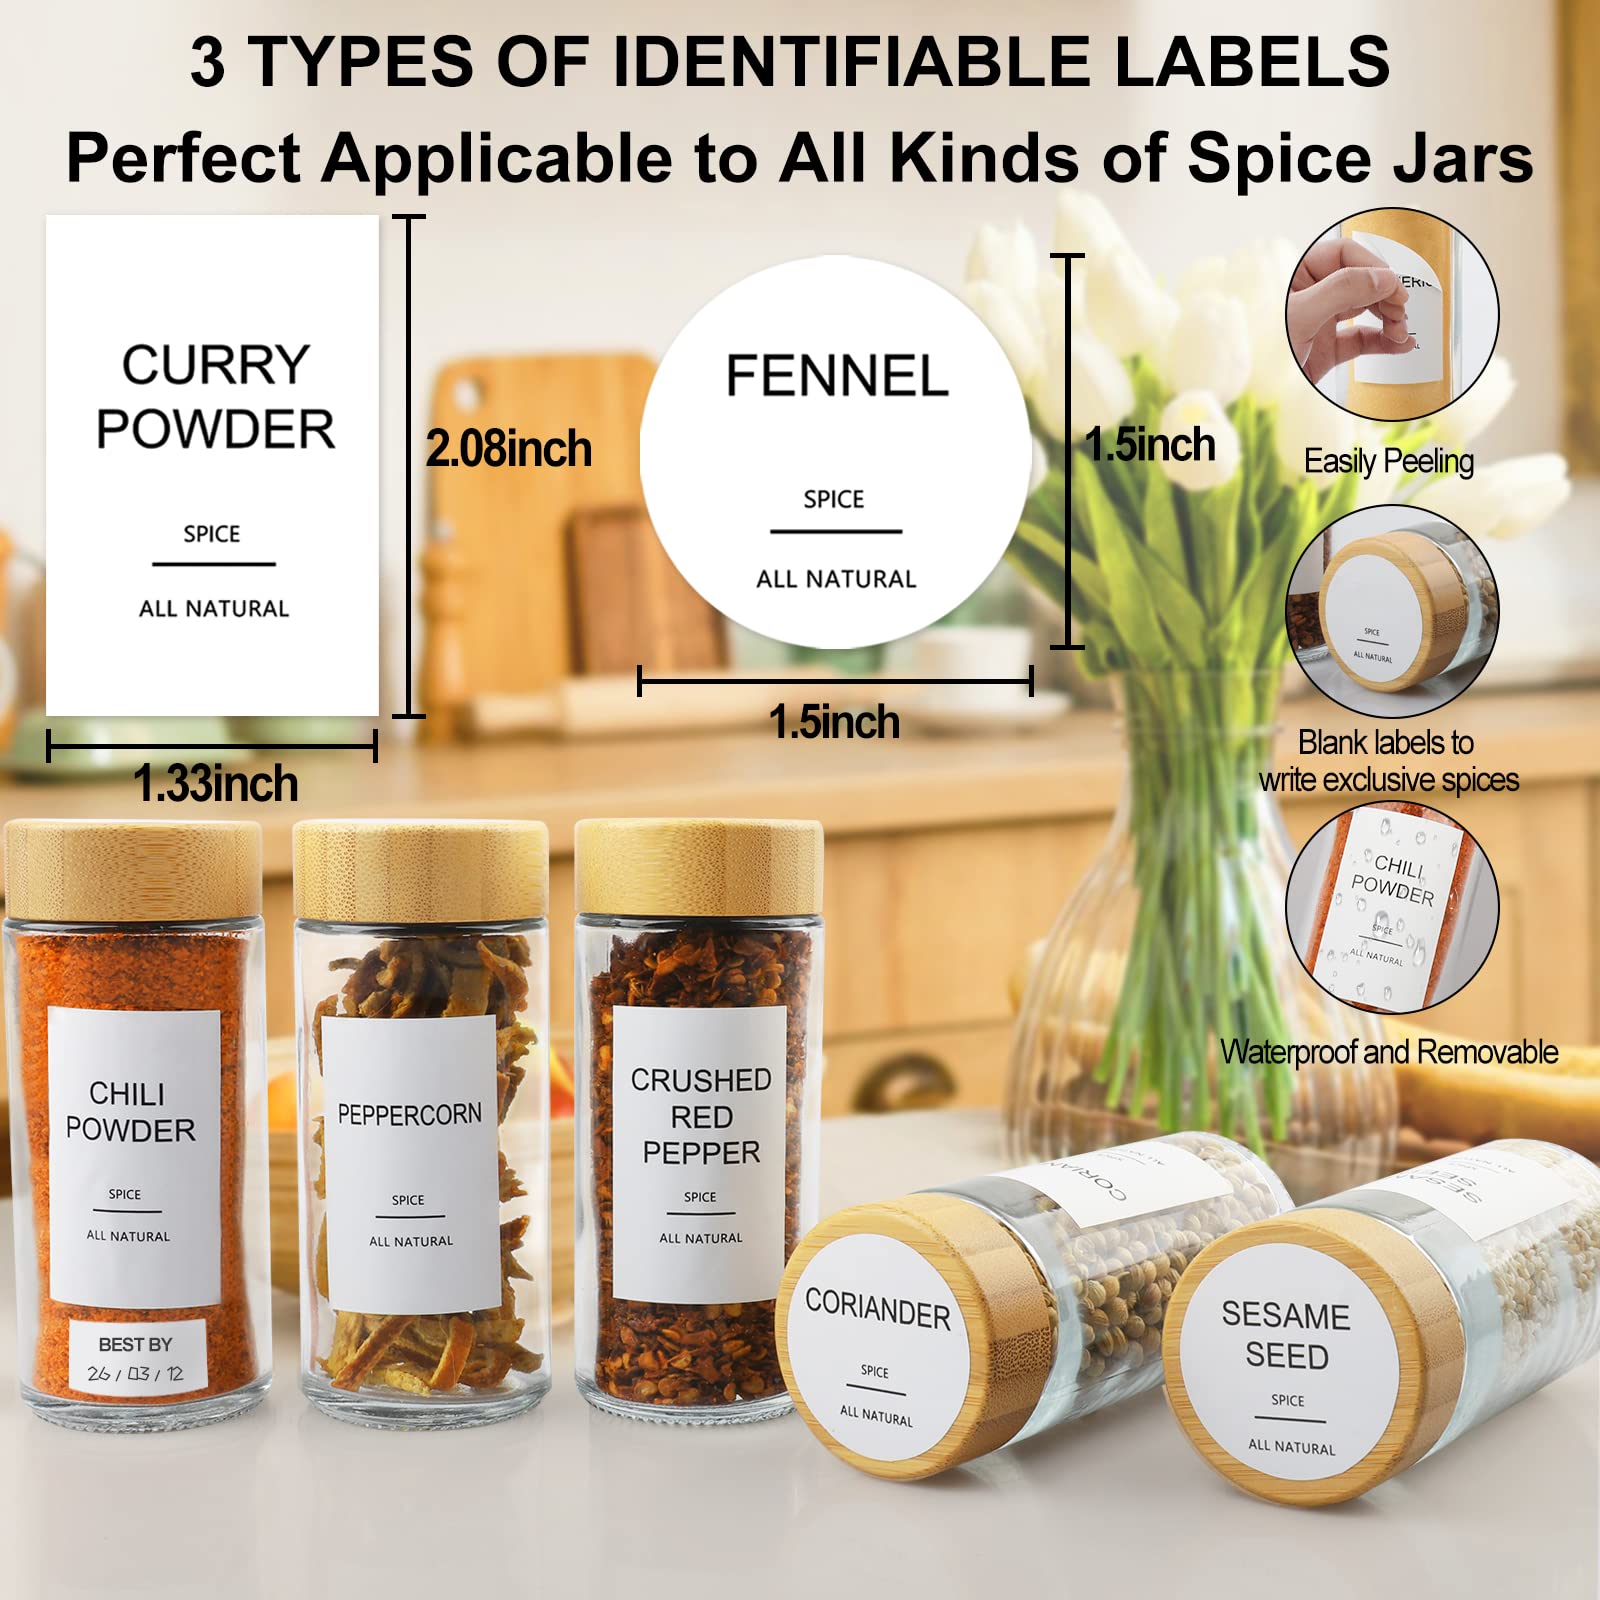 AISIPRIN Glass Spice Jars with 398 Labels-4oz 24 Pcs,Round Seasoning Jars with Bamboo Airtight Lids,Salt and Pepper Shakers Container Set -Shaker Lids, Funnel,Brush and Marker Included